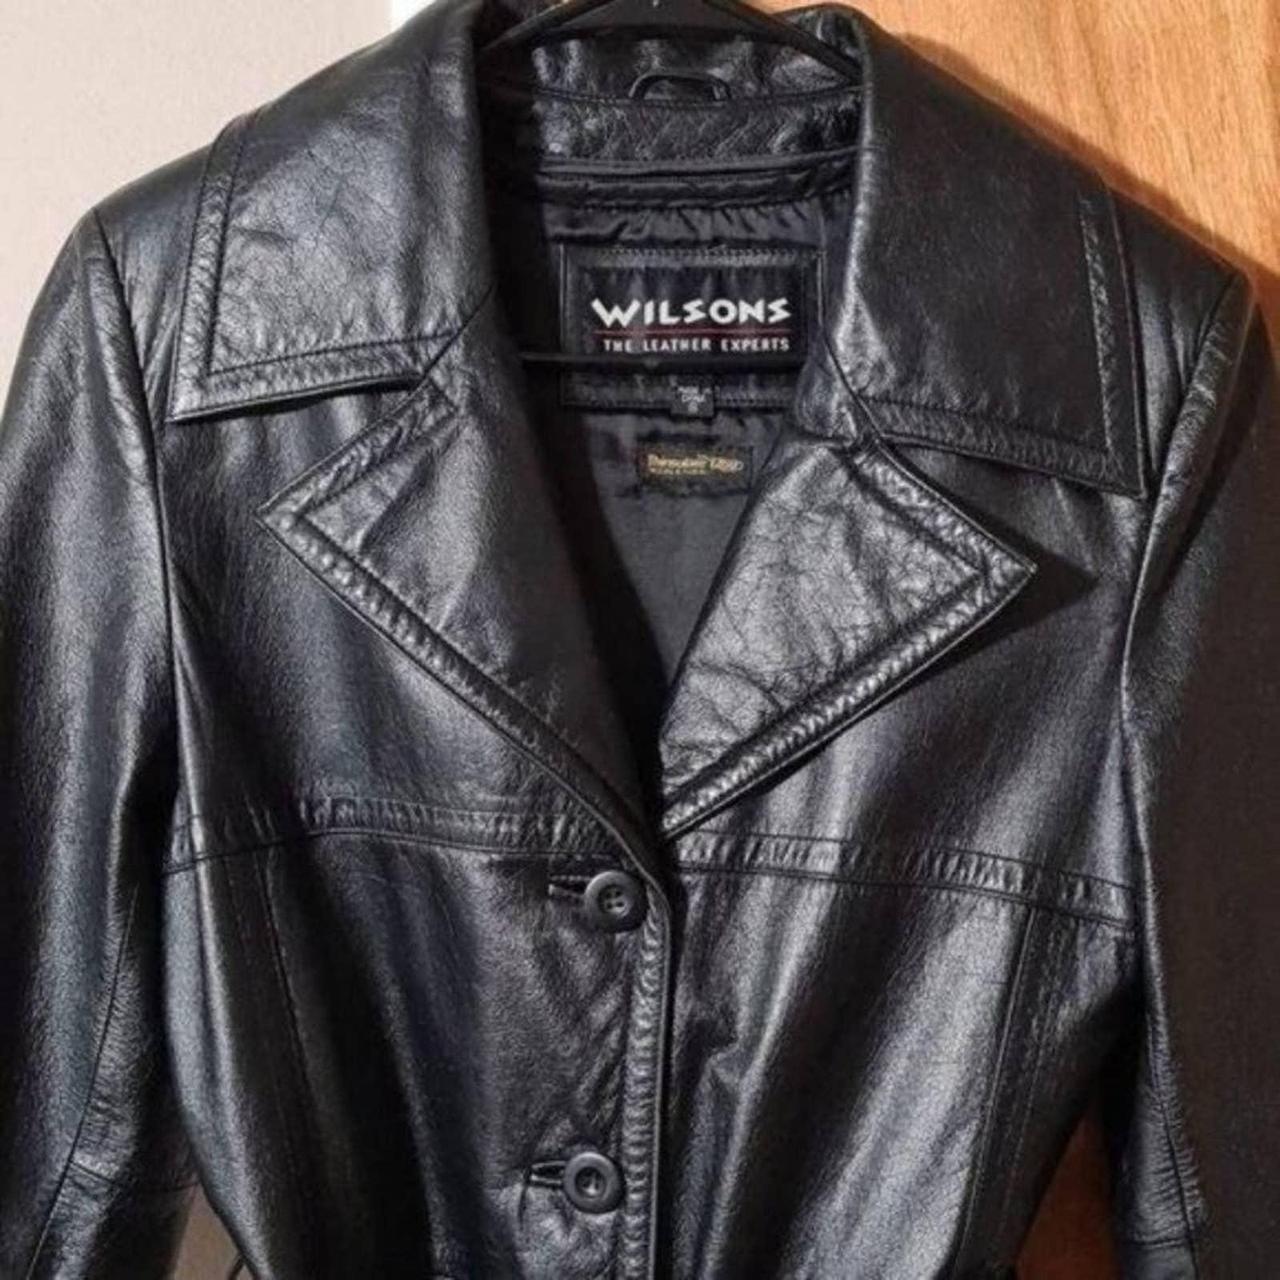 Product Image 2 - Wilsons Leather Jacket Small Black
snap